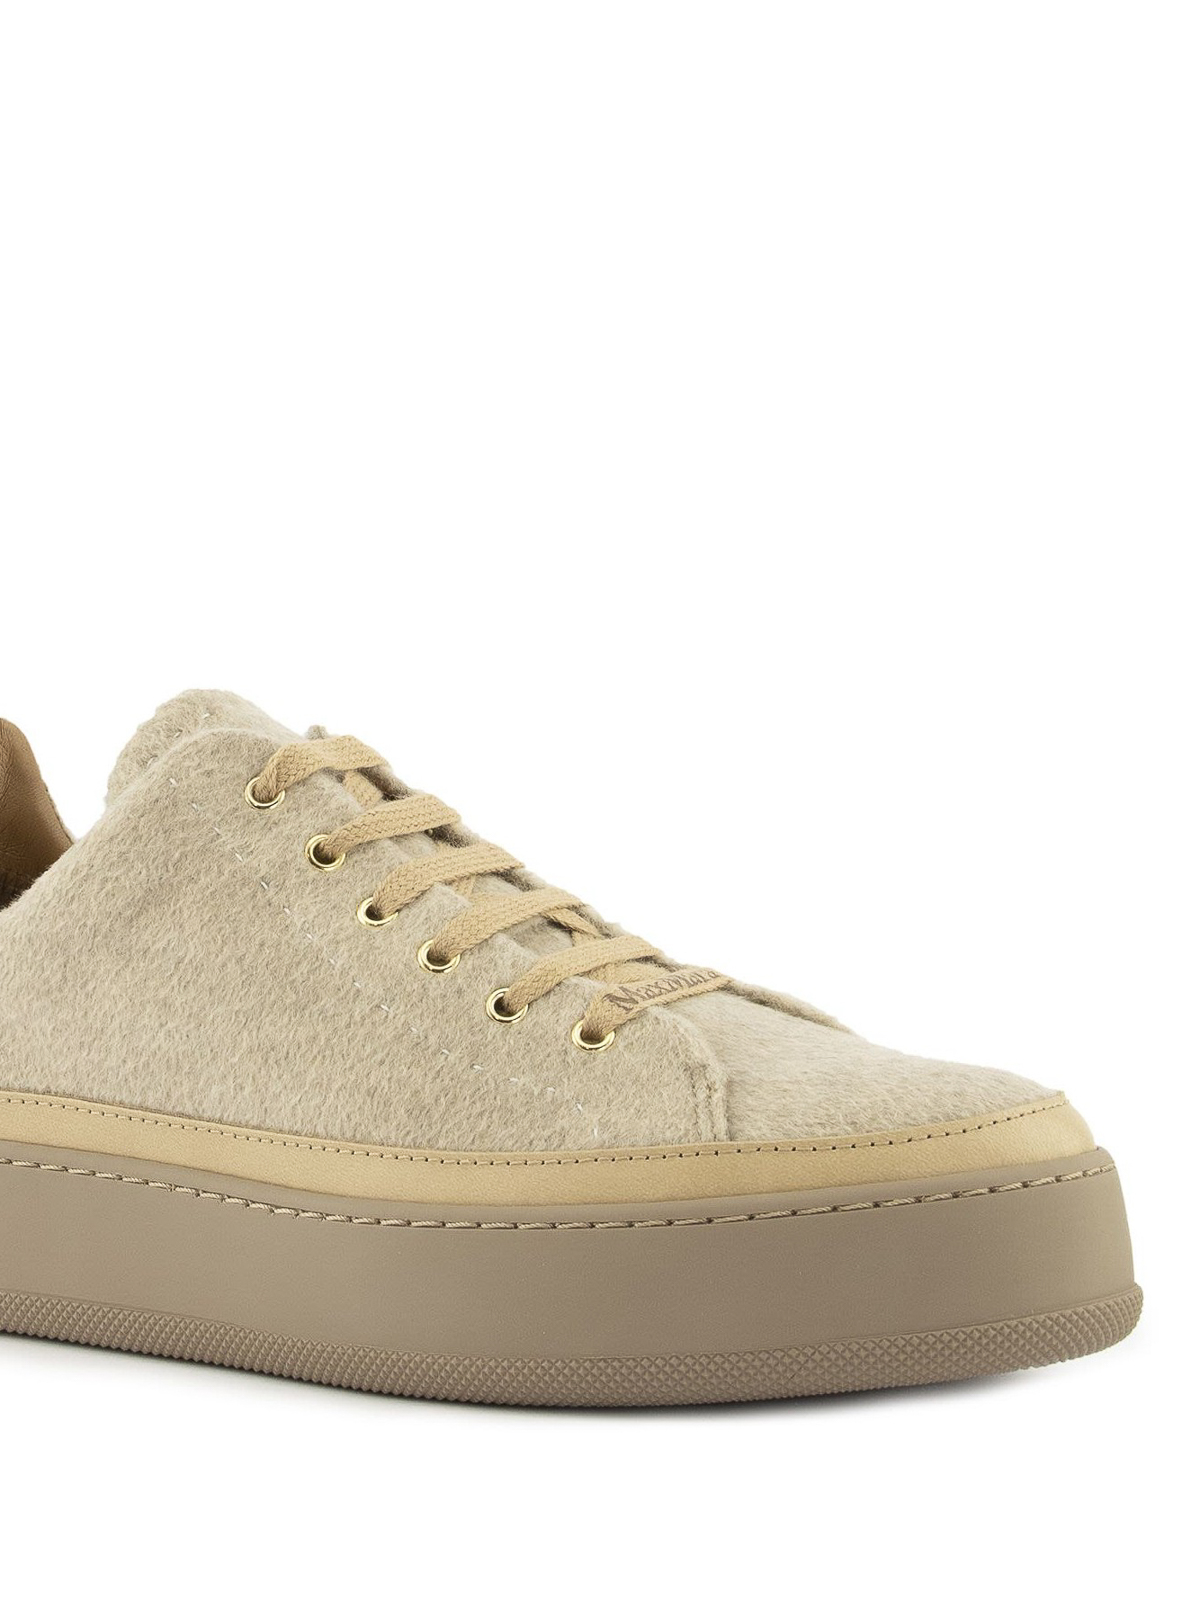 Trainers Max Mara - Tunny sneakers - 47660707600001 | Shop online 